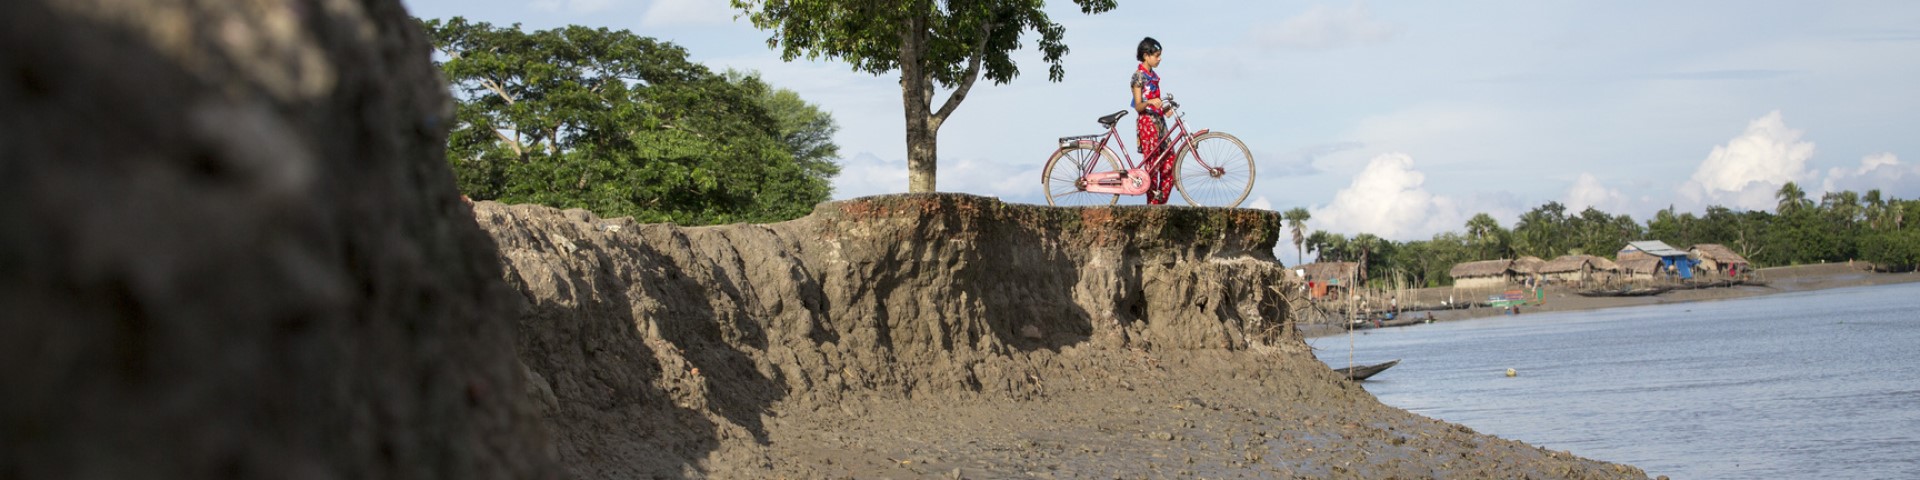 A person stands with their bicycle on a riverbank that is affected by erosion.